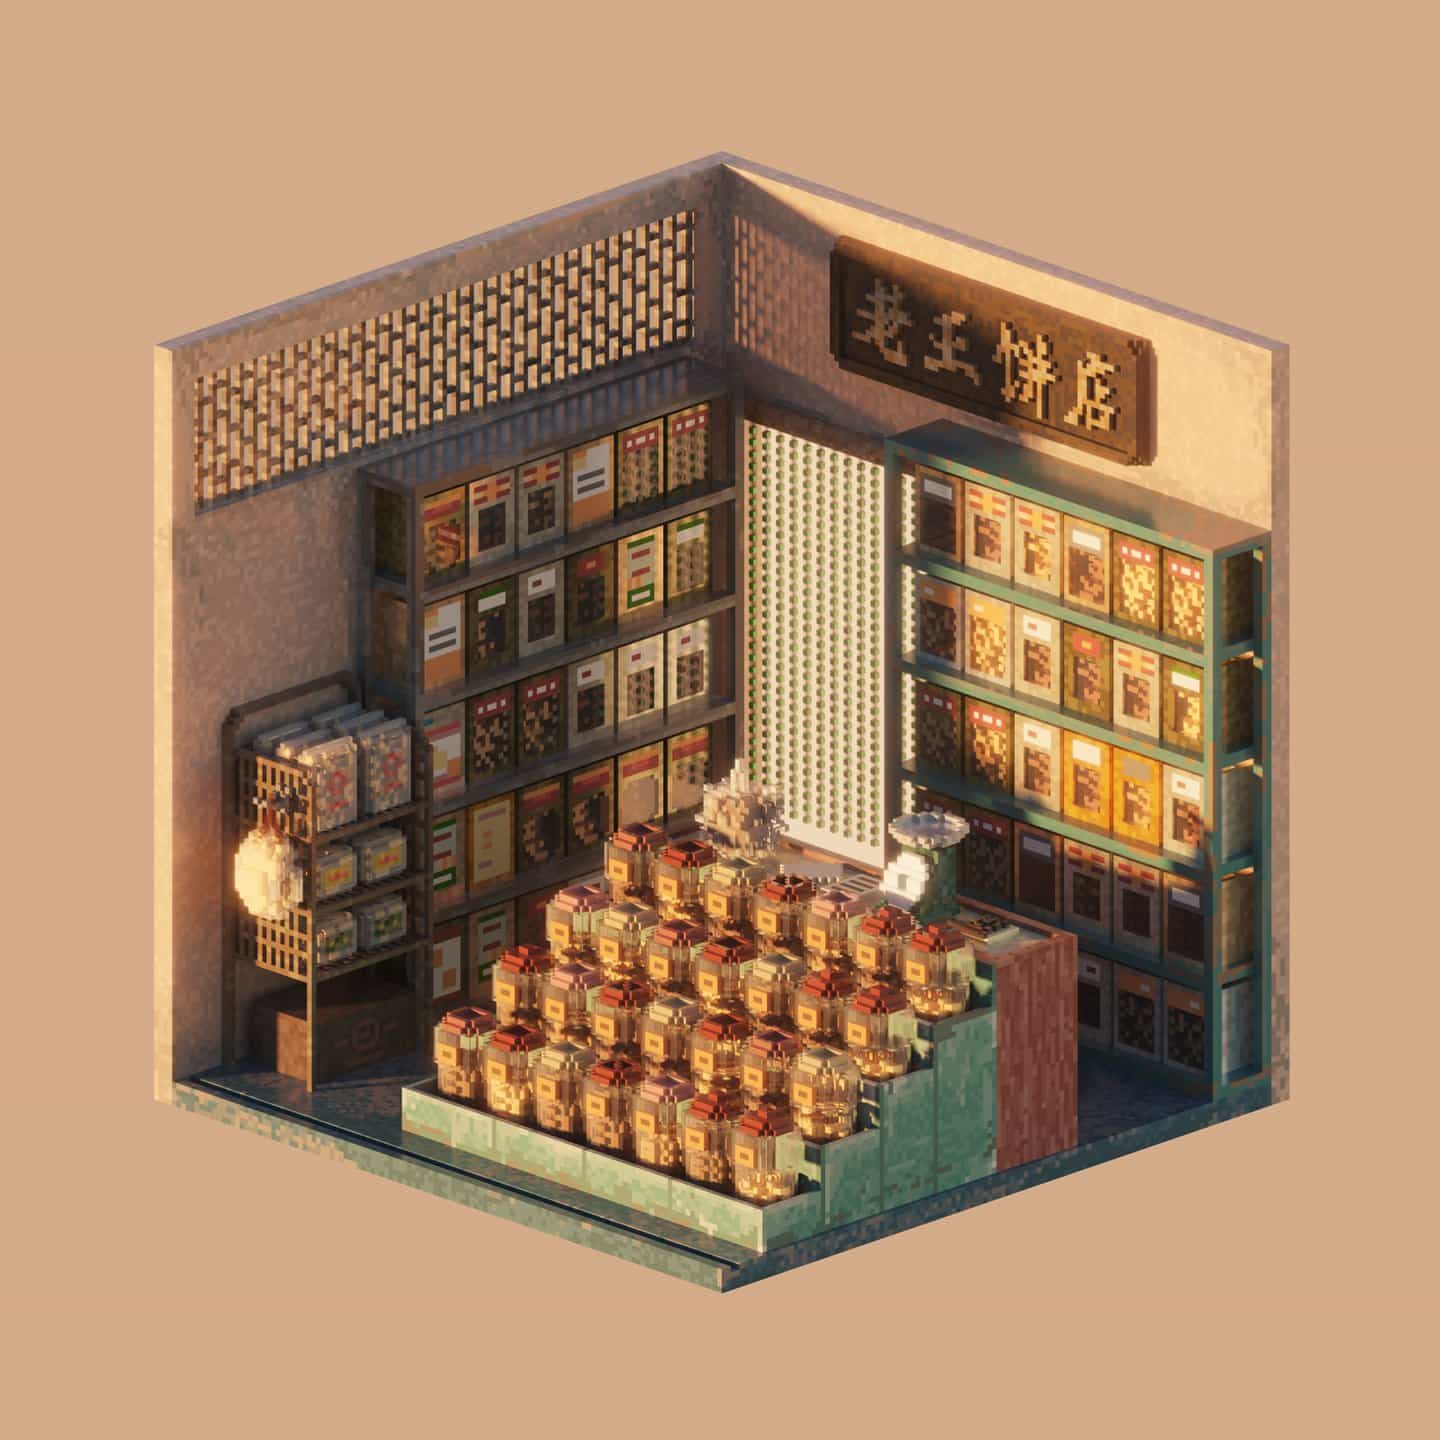 Shin Oh: Biscuit Shop, serie Tiny Voxel Shops de 126³ (Copyright © Shin Oh, 2021)